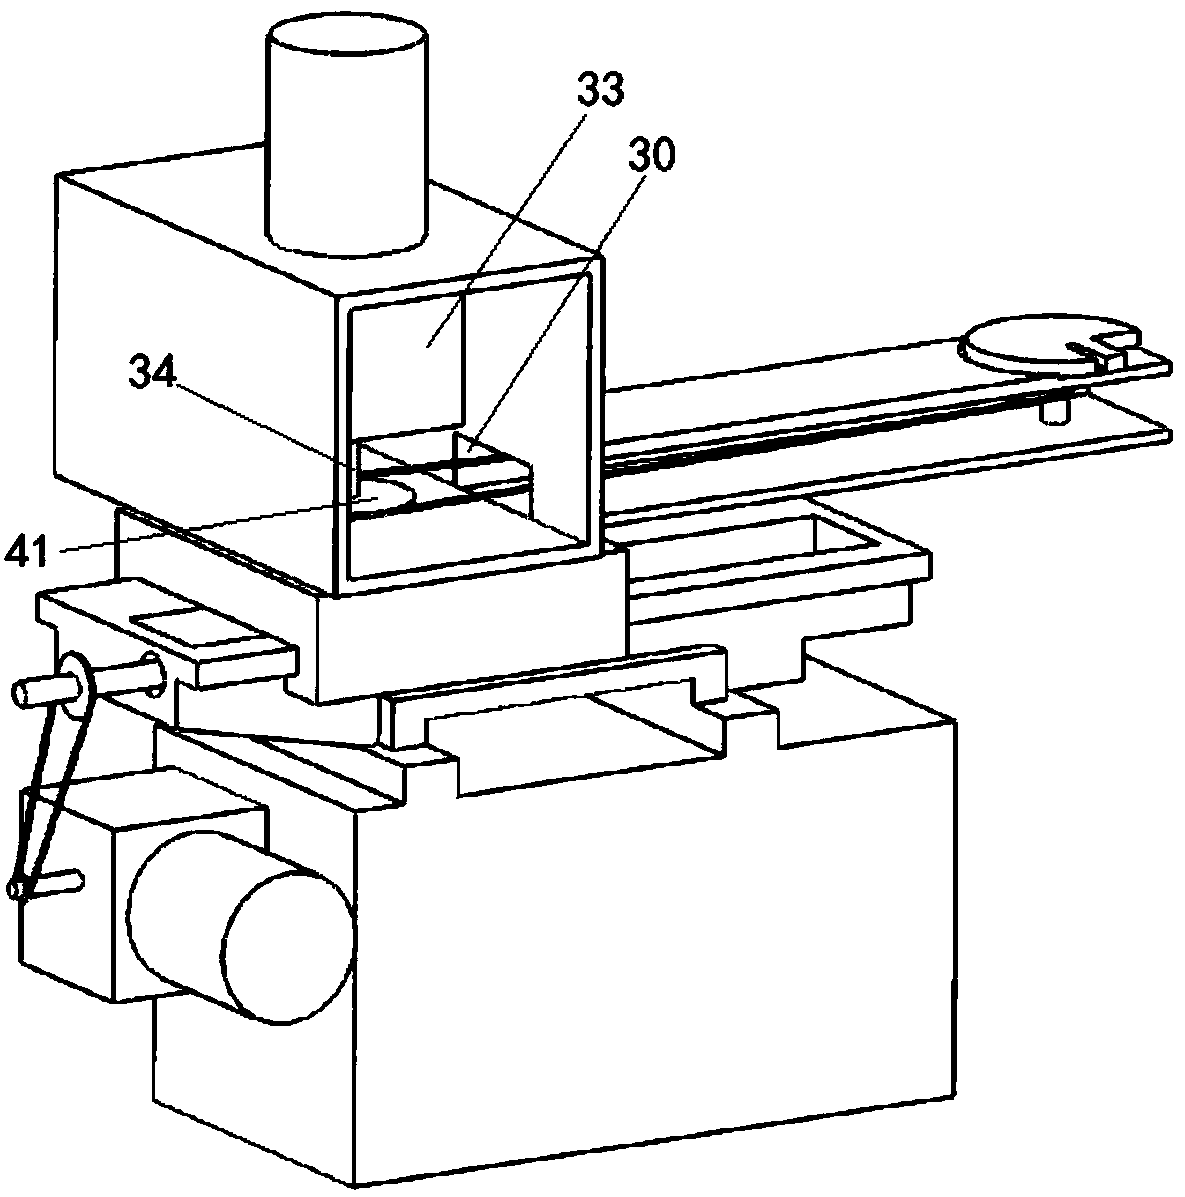 A surface processing equipment